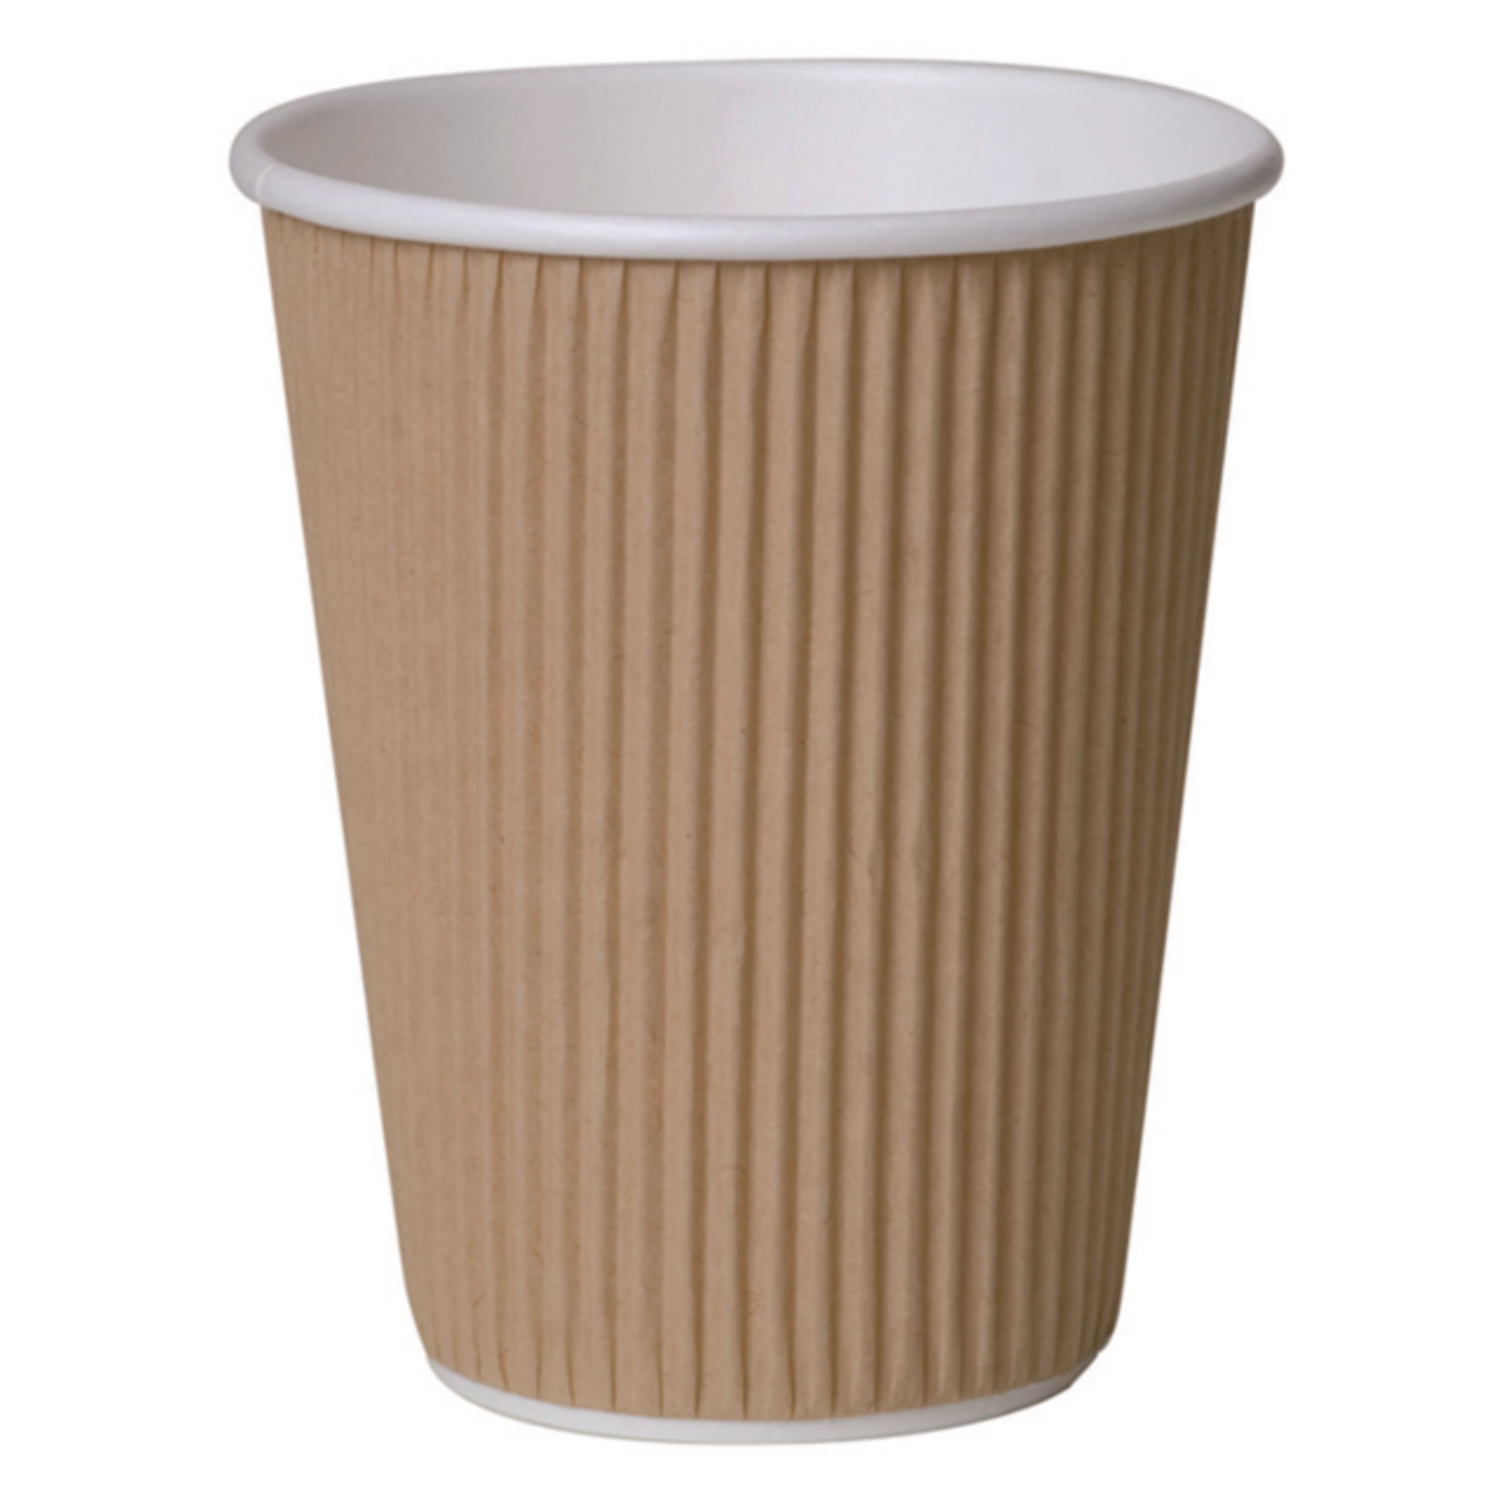  Ripple cup, Paper , 8oz, 92mm, brown  1